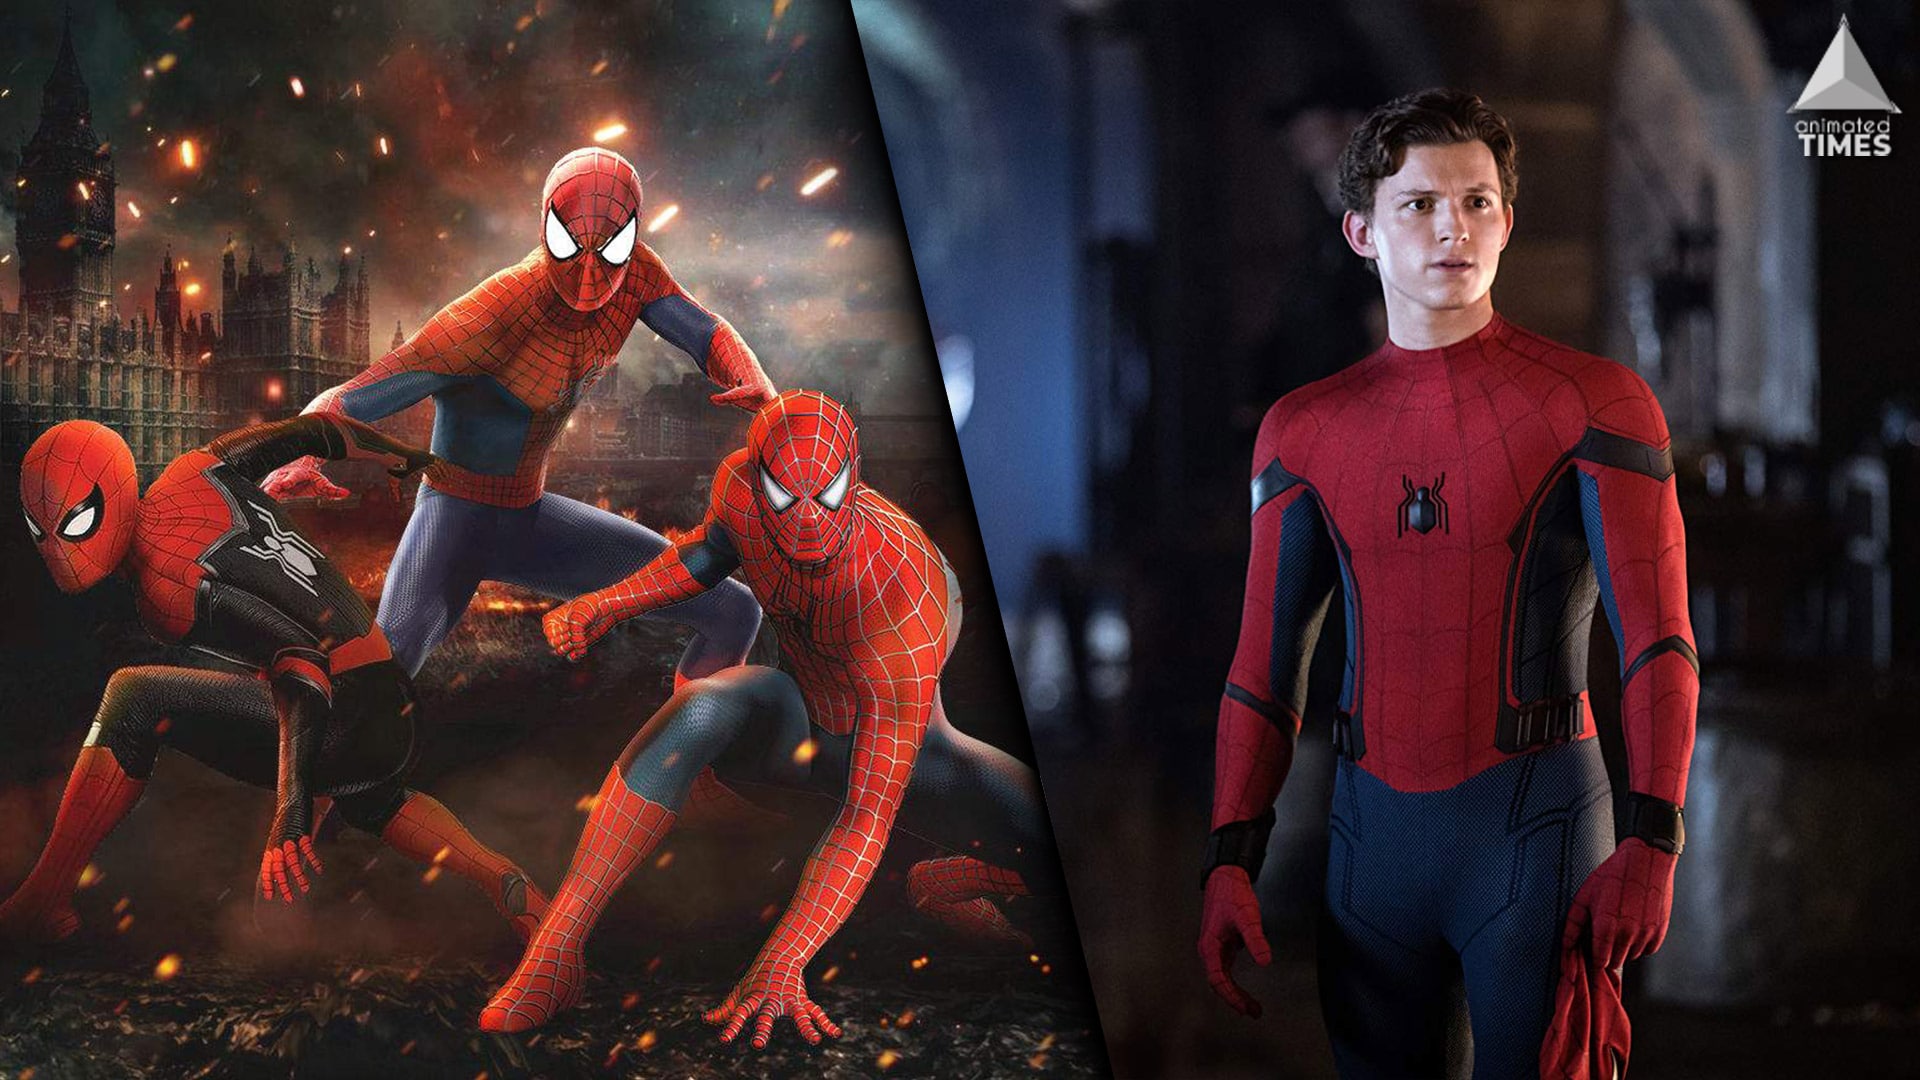 Spider-Man 3 Can Tie In Loose Ends With The Spider-Man Franchise